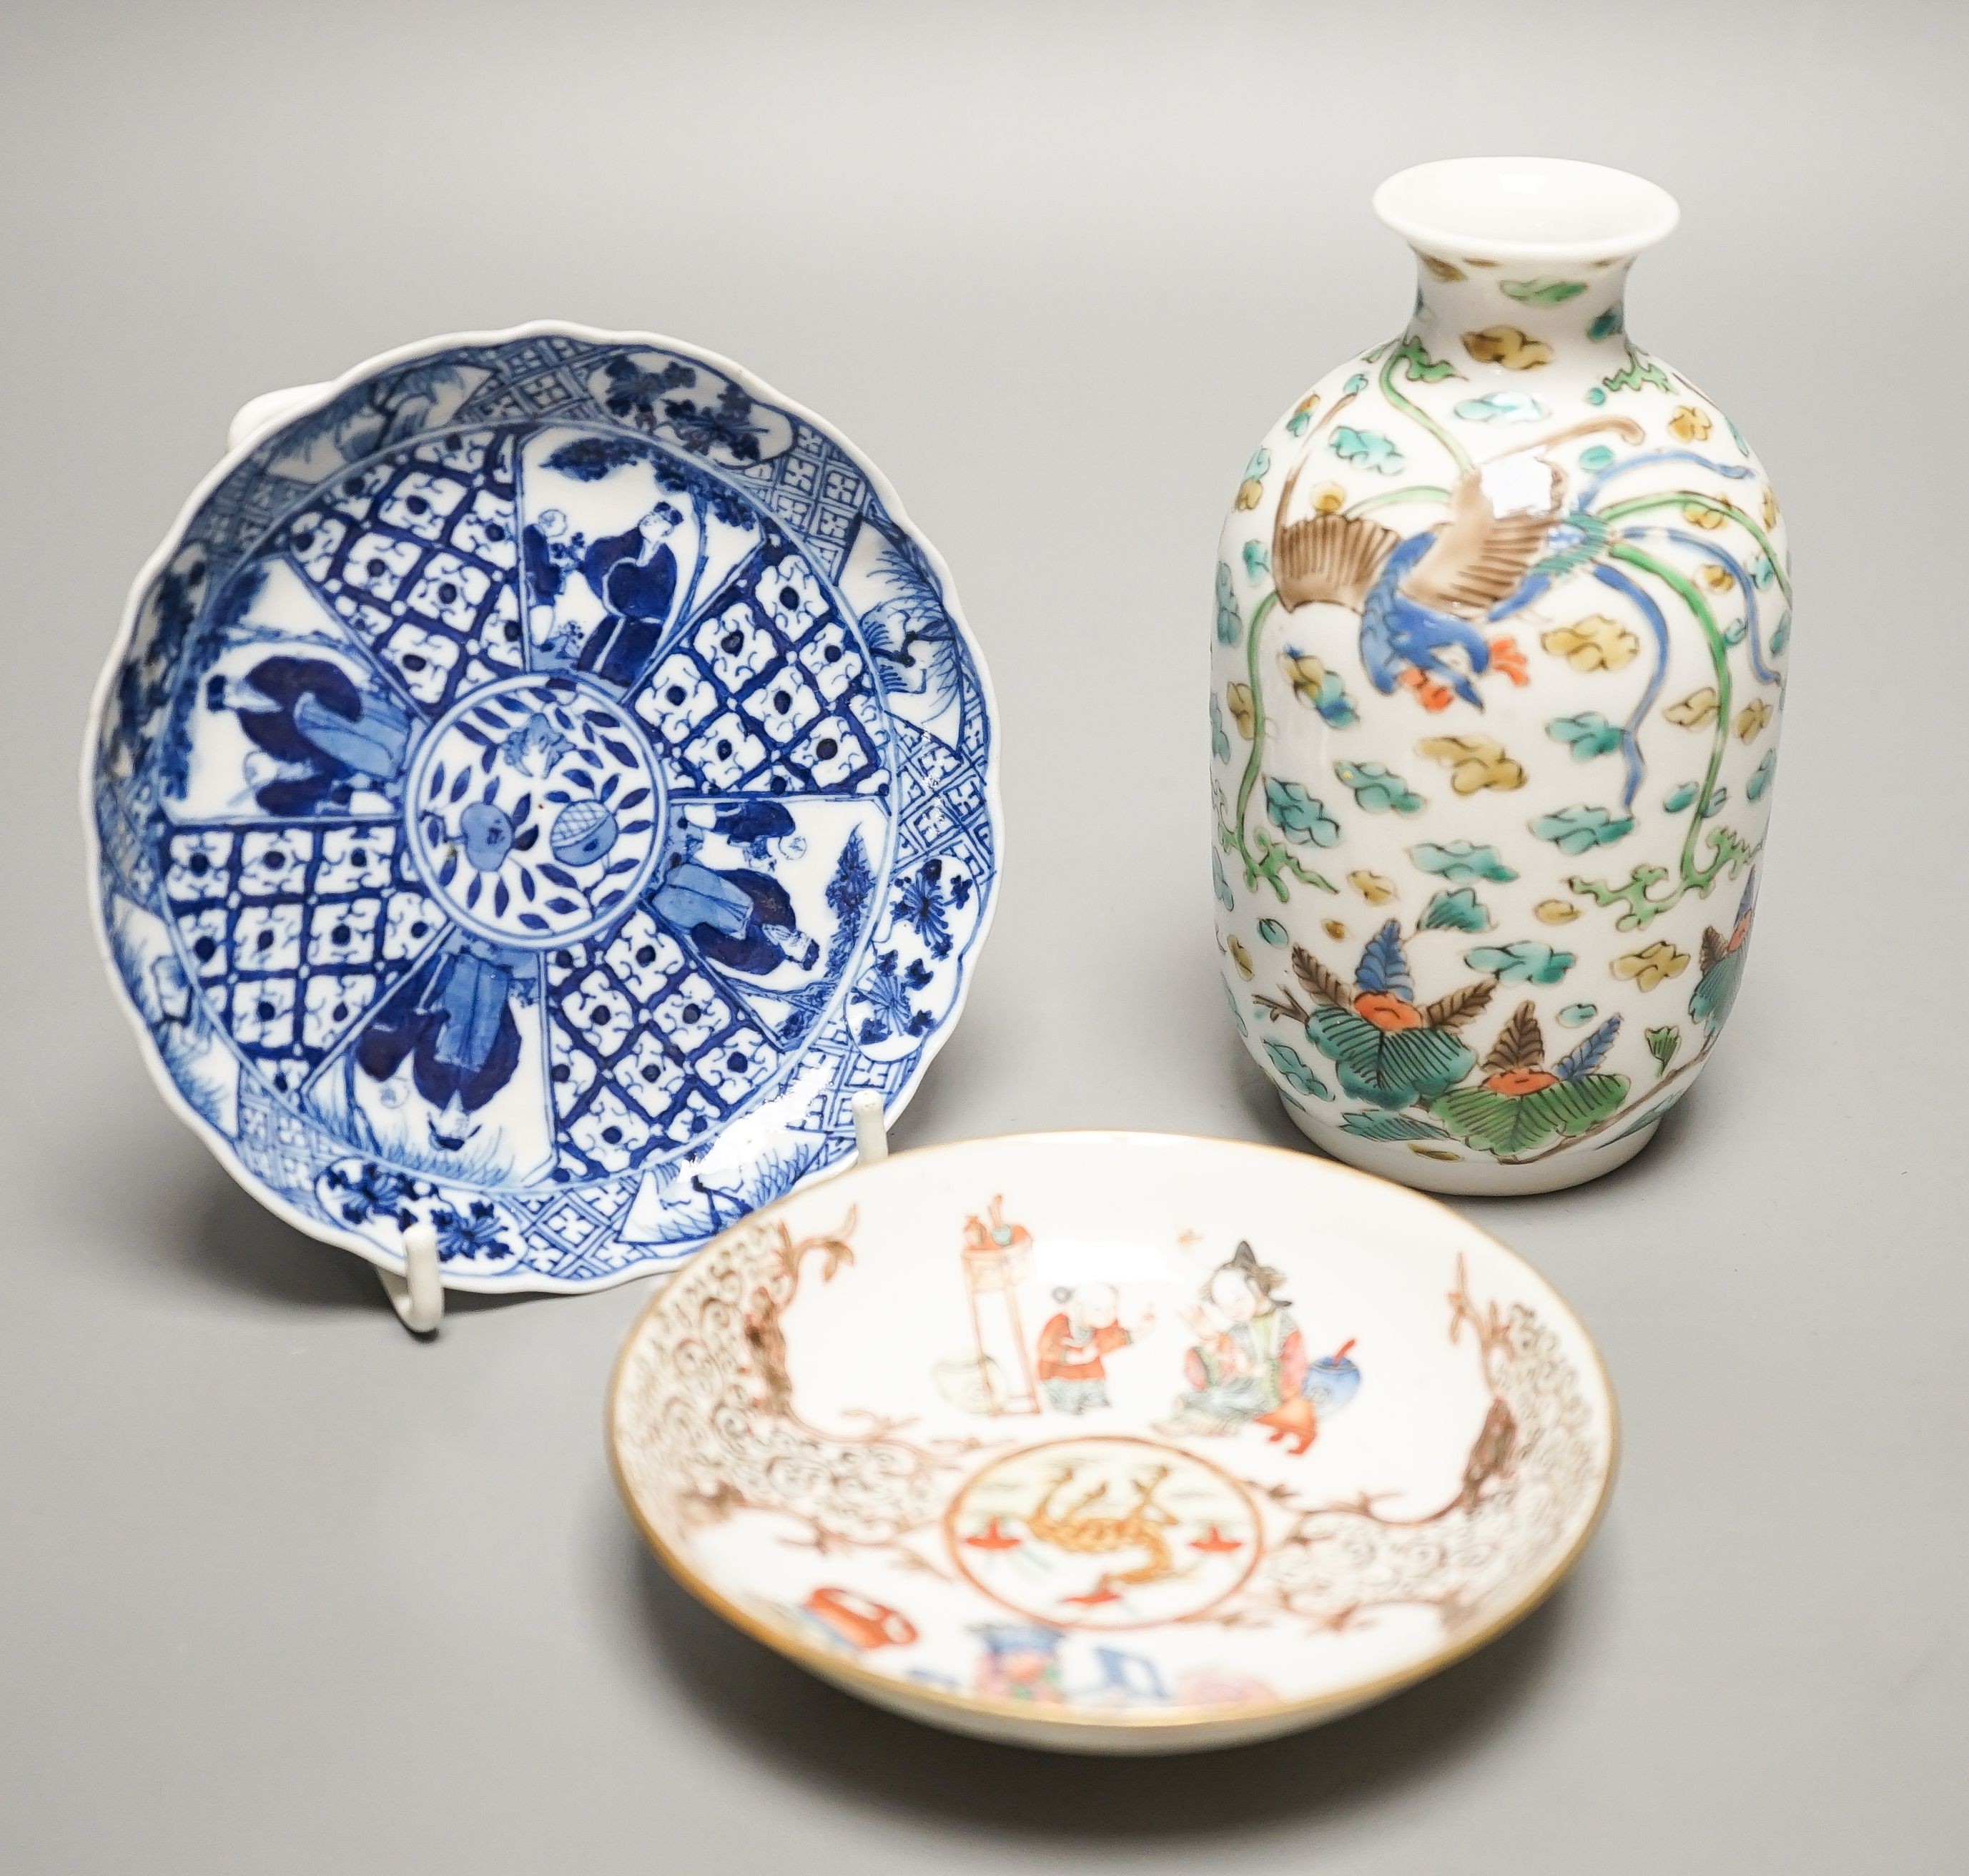 Two Chinese porcelain saucer dishes and an enamelled porcelain vase, 18th century and later, 12.5cm